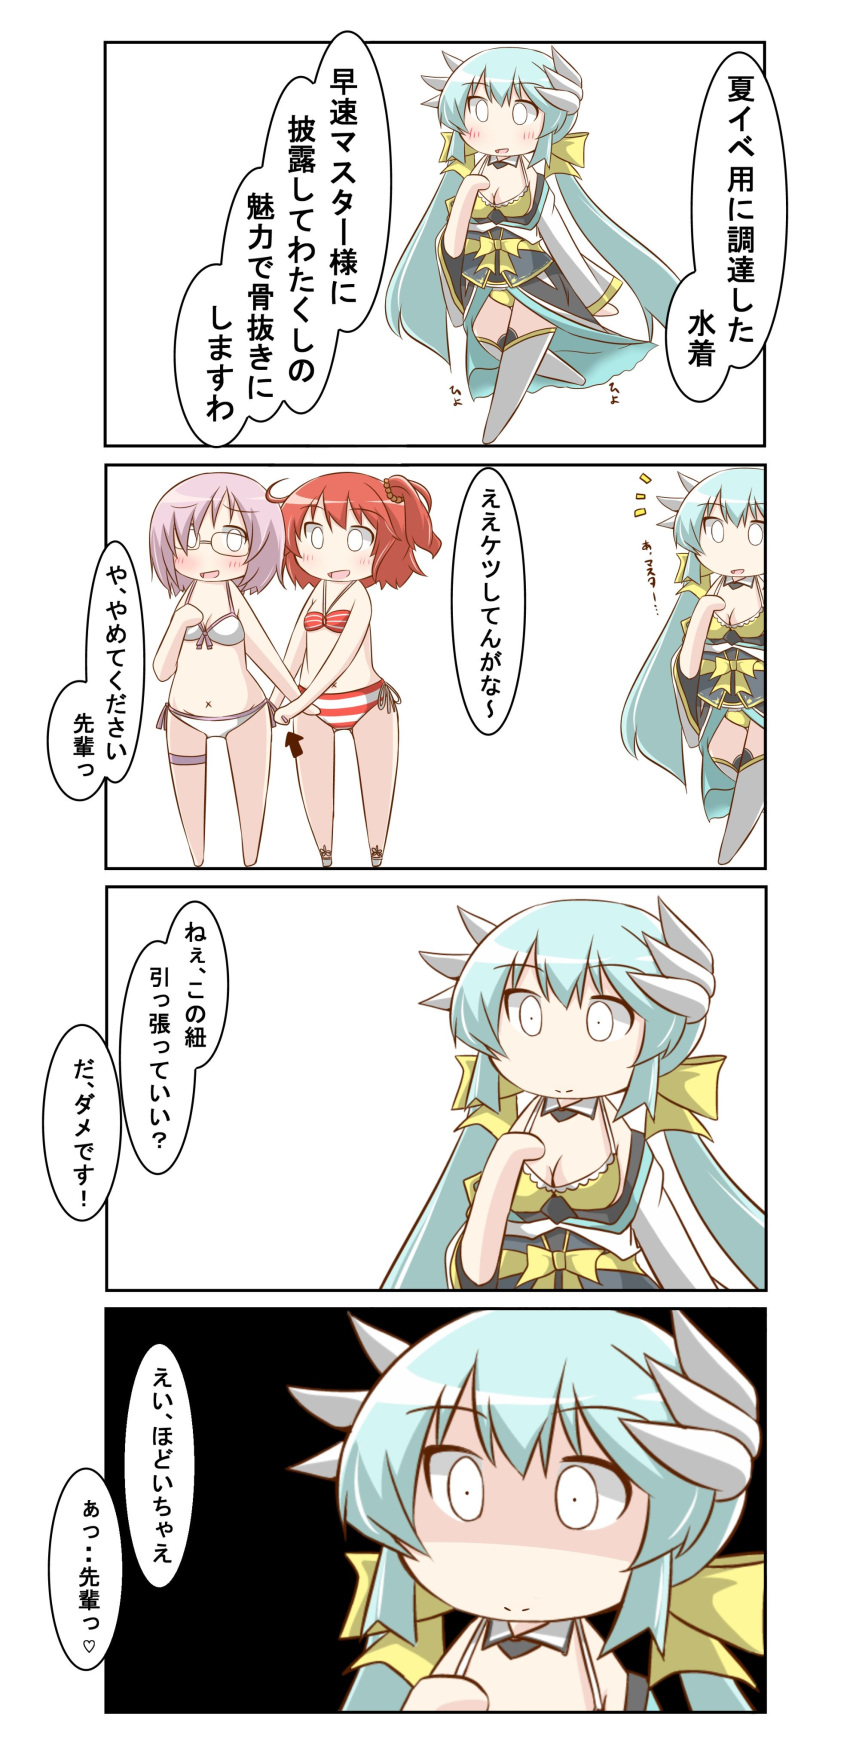 3girls 4koma absurdres ahoge aqua_hair bare_arms bare_legs bare_shoulders bikini breasts cleavage comic commentary_request eyebrows eyebrows_visible_through_hair fate/grand_order fate_(series) female_protagonist_(fate/grand_order) glasses hair_ornament hair_over_one_eye hair_ribbon highres kiyohime_(fate/grand_order) long_hair multiple_girls nanakusa_nazuna pink_hair redhead ribbon shielder_(fate/grand_order) short_hair side_ponytail speech_bubble swimsuit translation_request